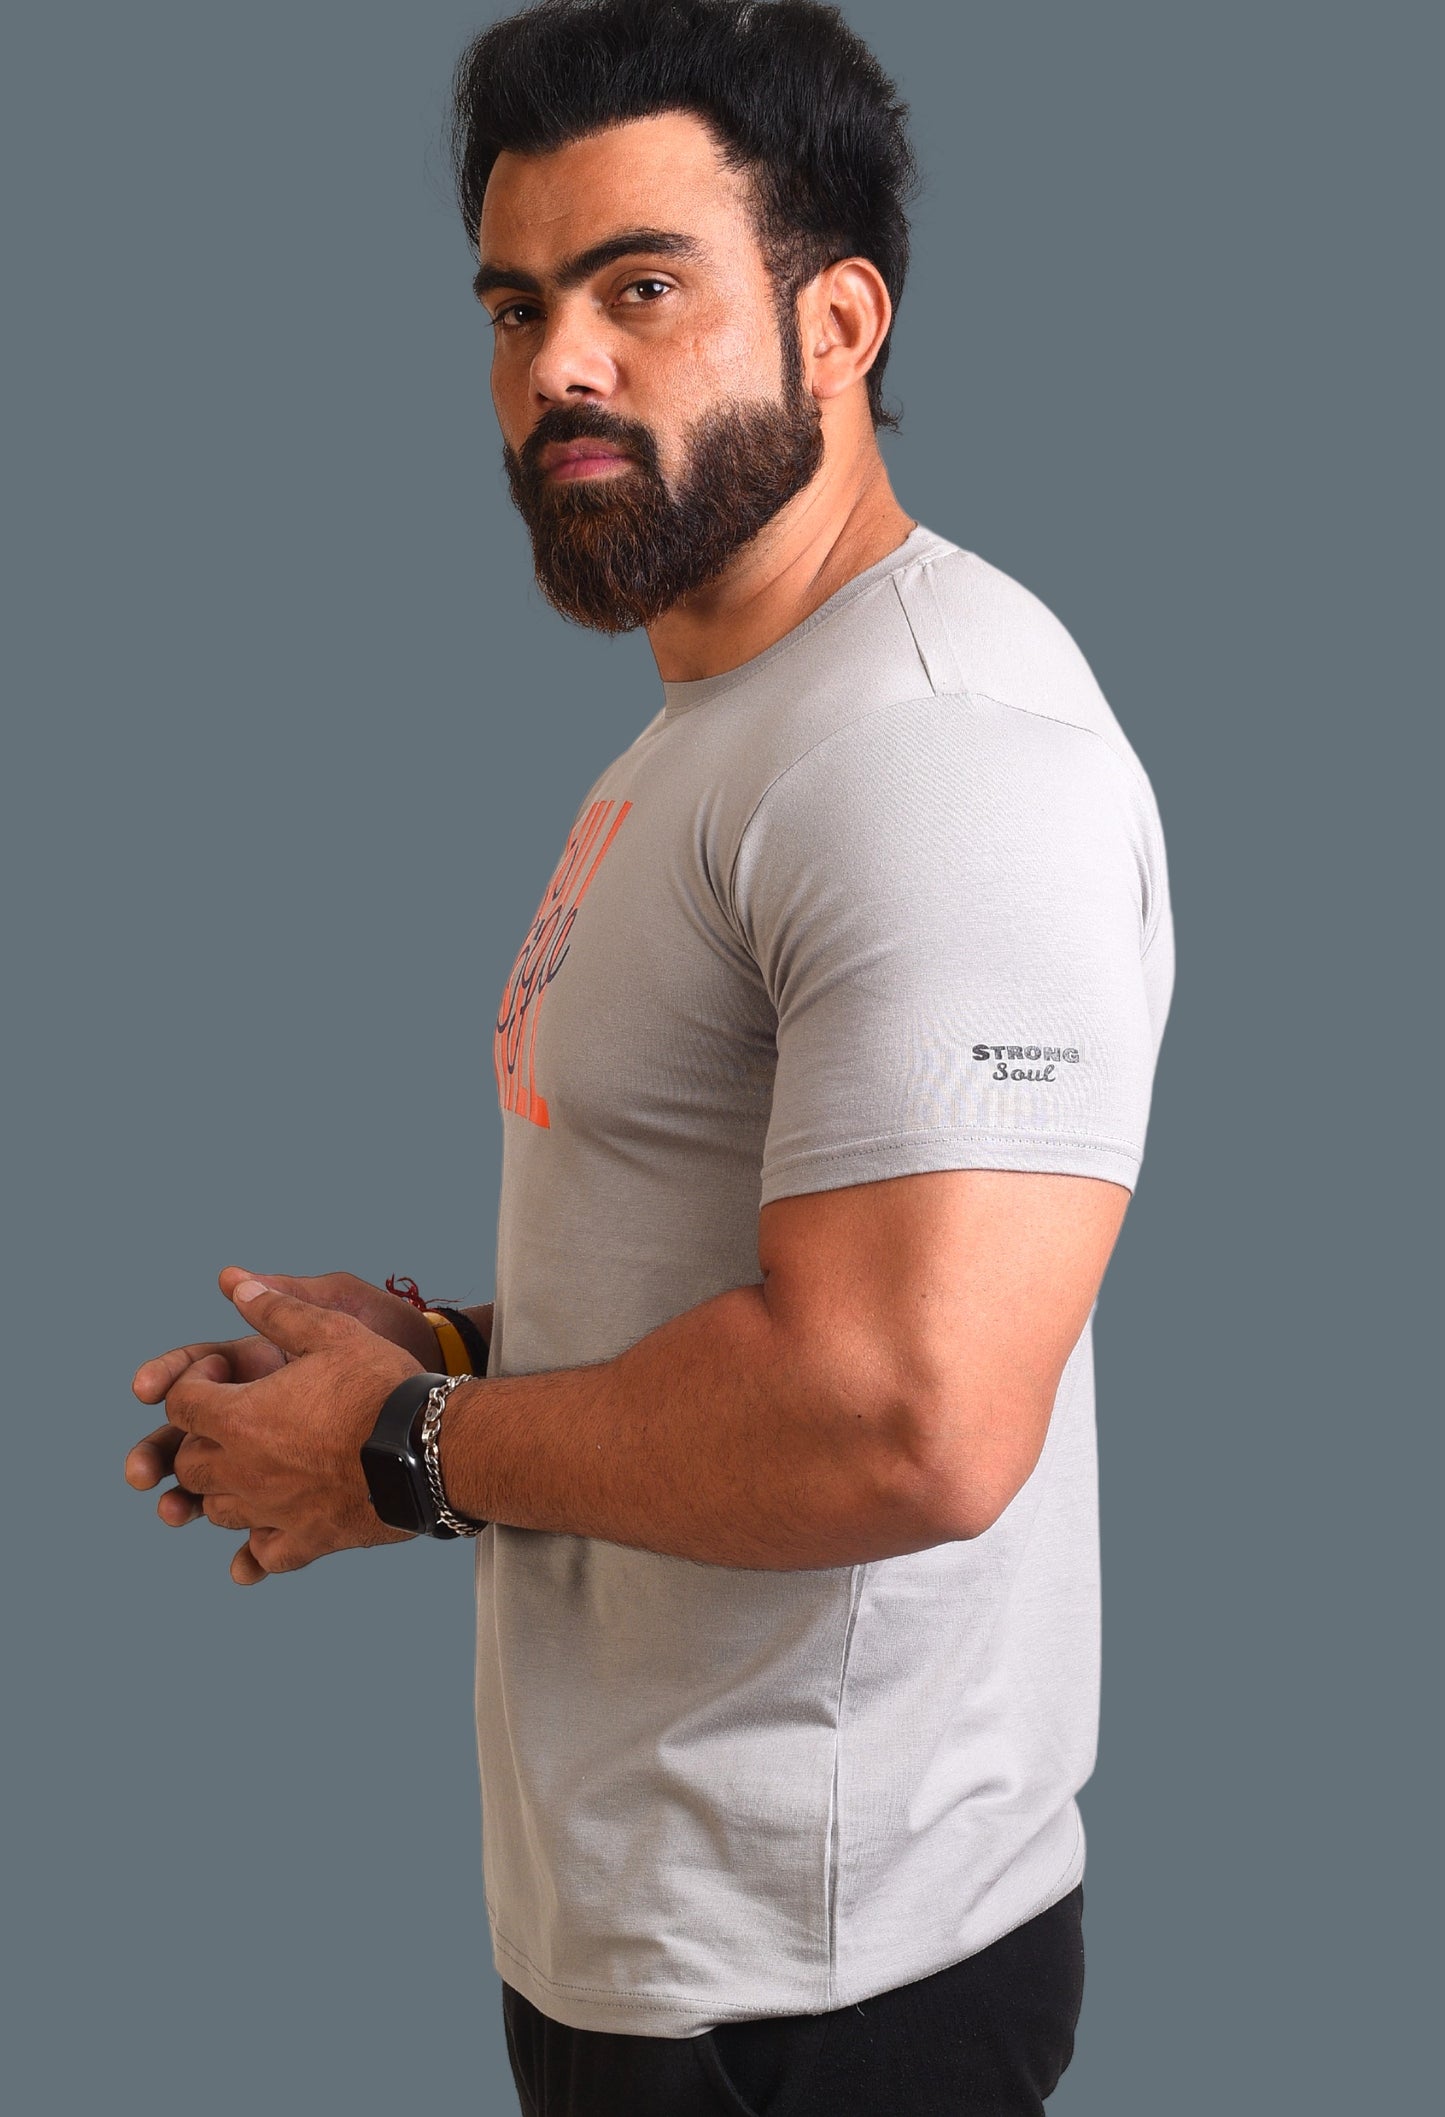 Gym T Shirt - Kill The Ego - Men T-Shirt with premium cotton Lycra. The Sports T Shirt by Strong Soul